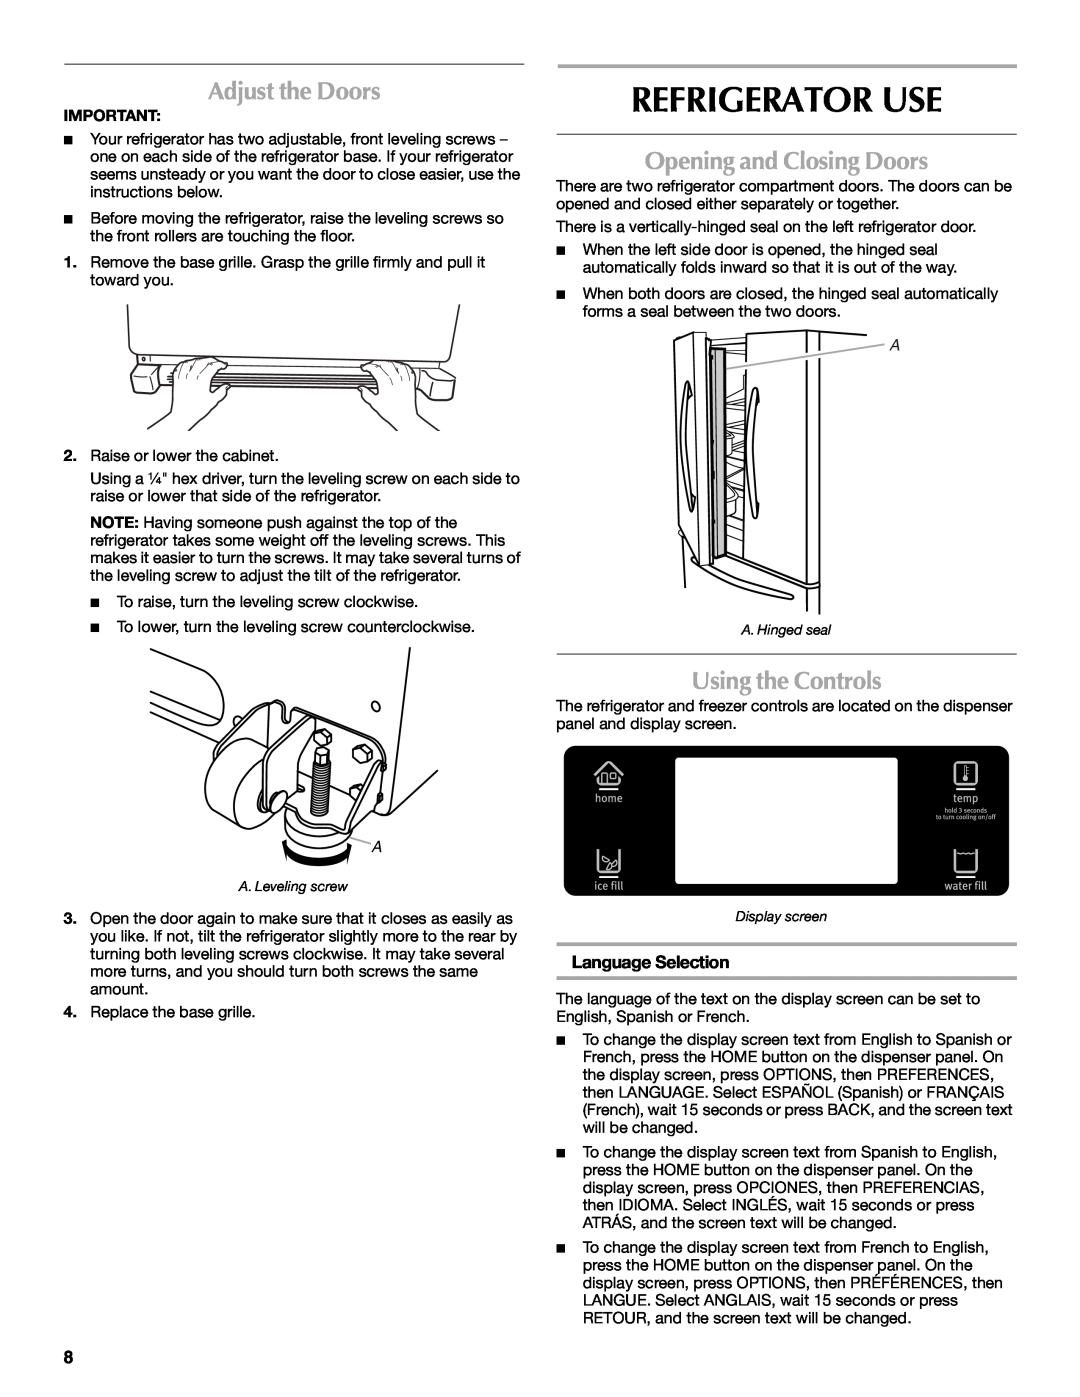 Maytag W10294936A Refrigerator Use, Adjust the Doors, Opening and Closing Doors, Using the Controls, Language Selection 